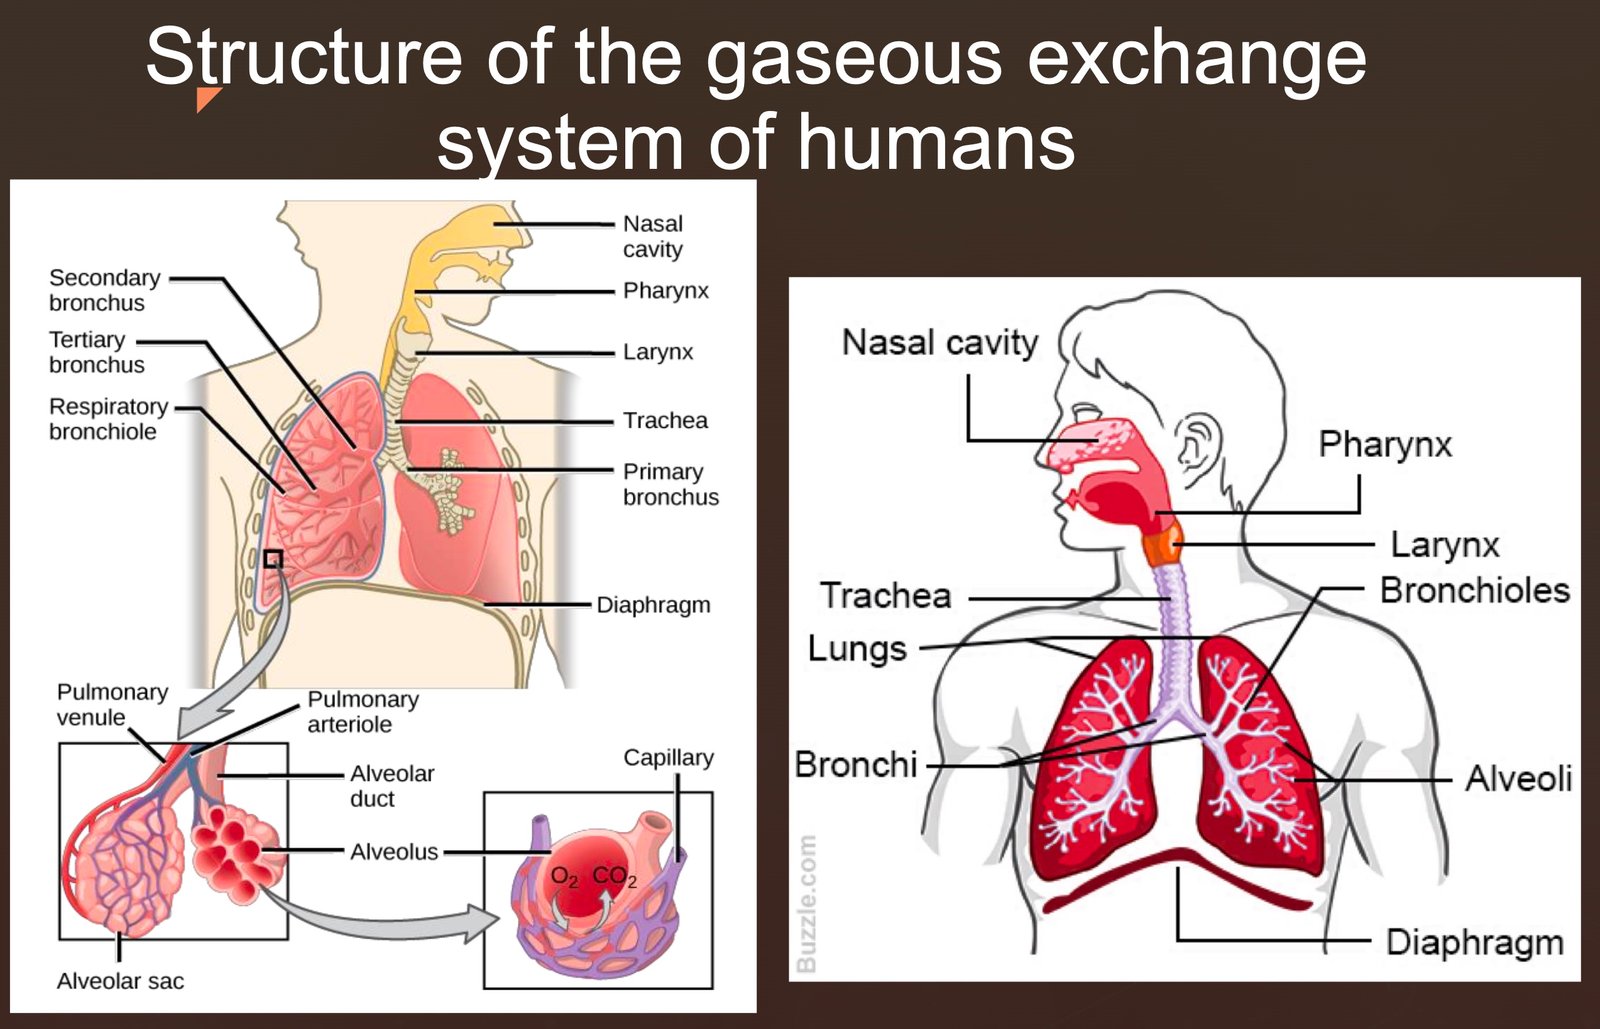 grade 11 life science assignment term 3 gaseous exchange